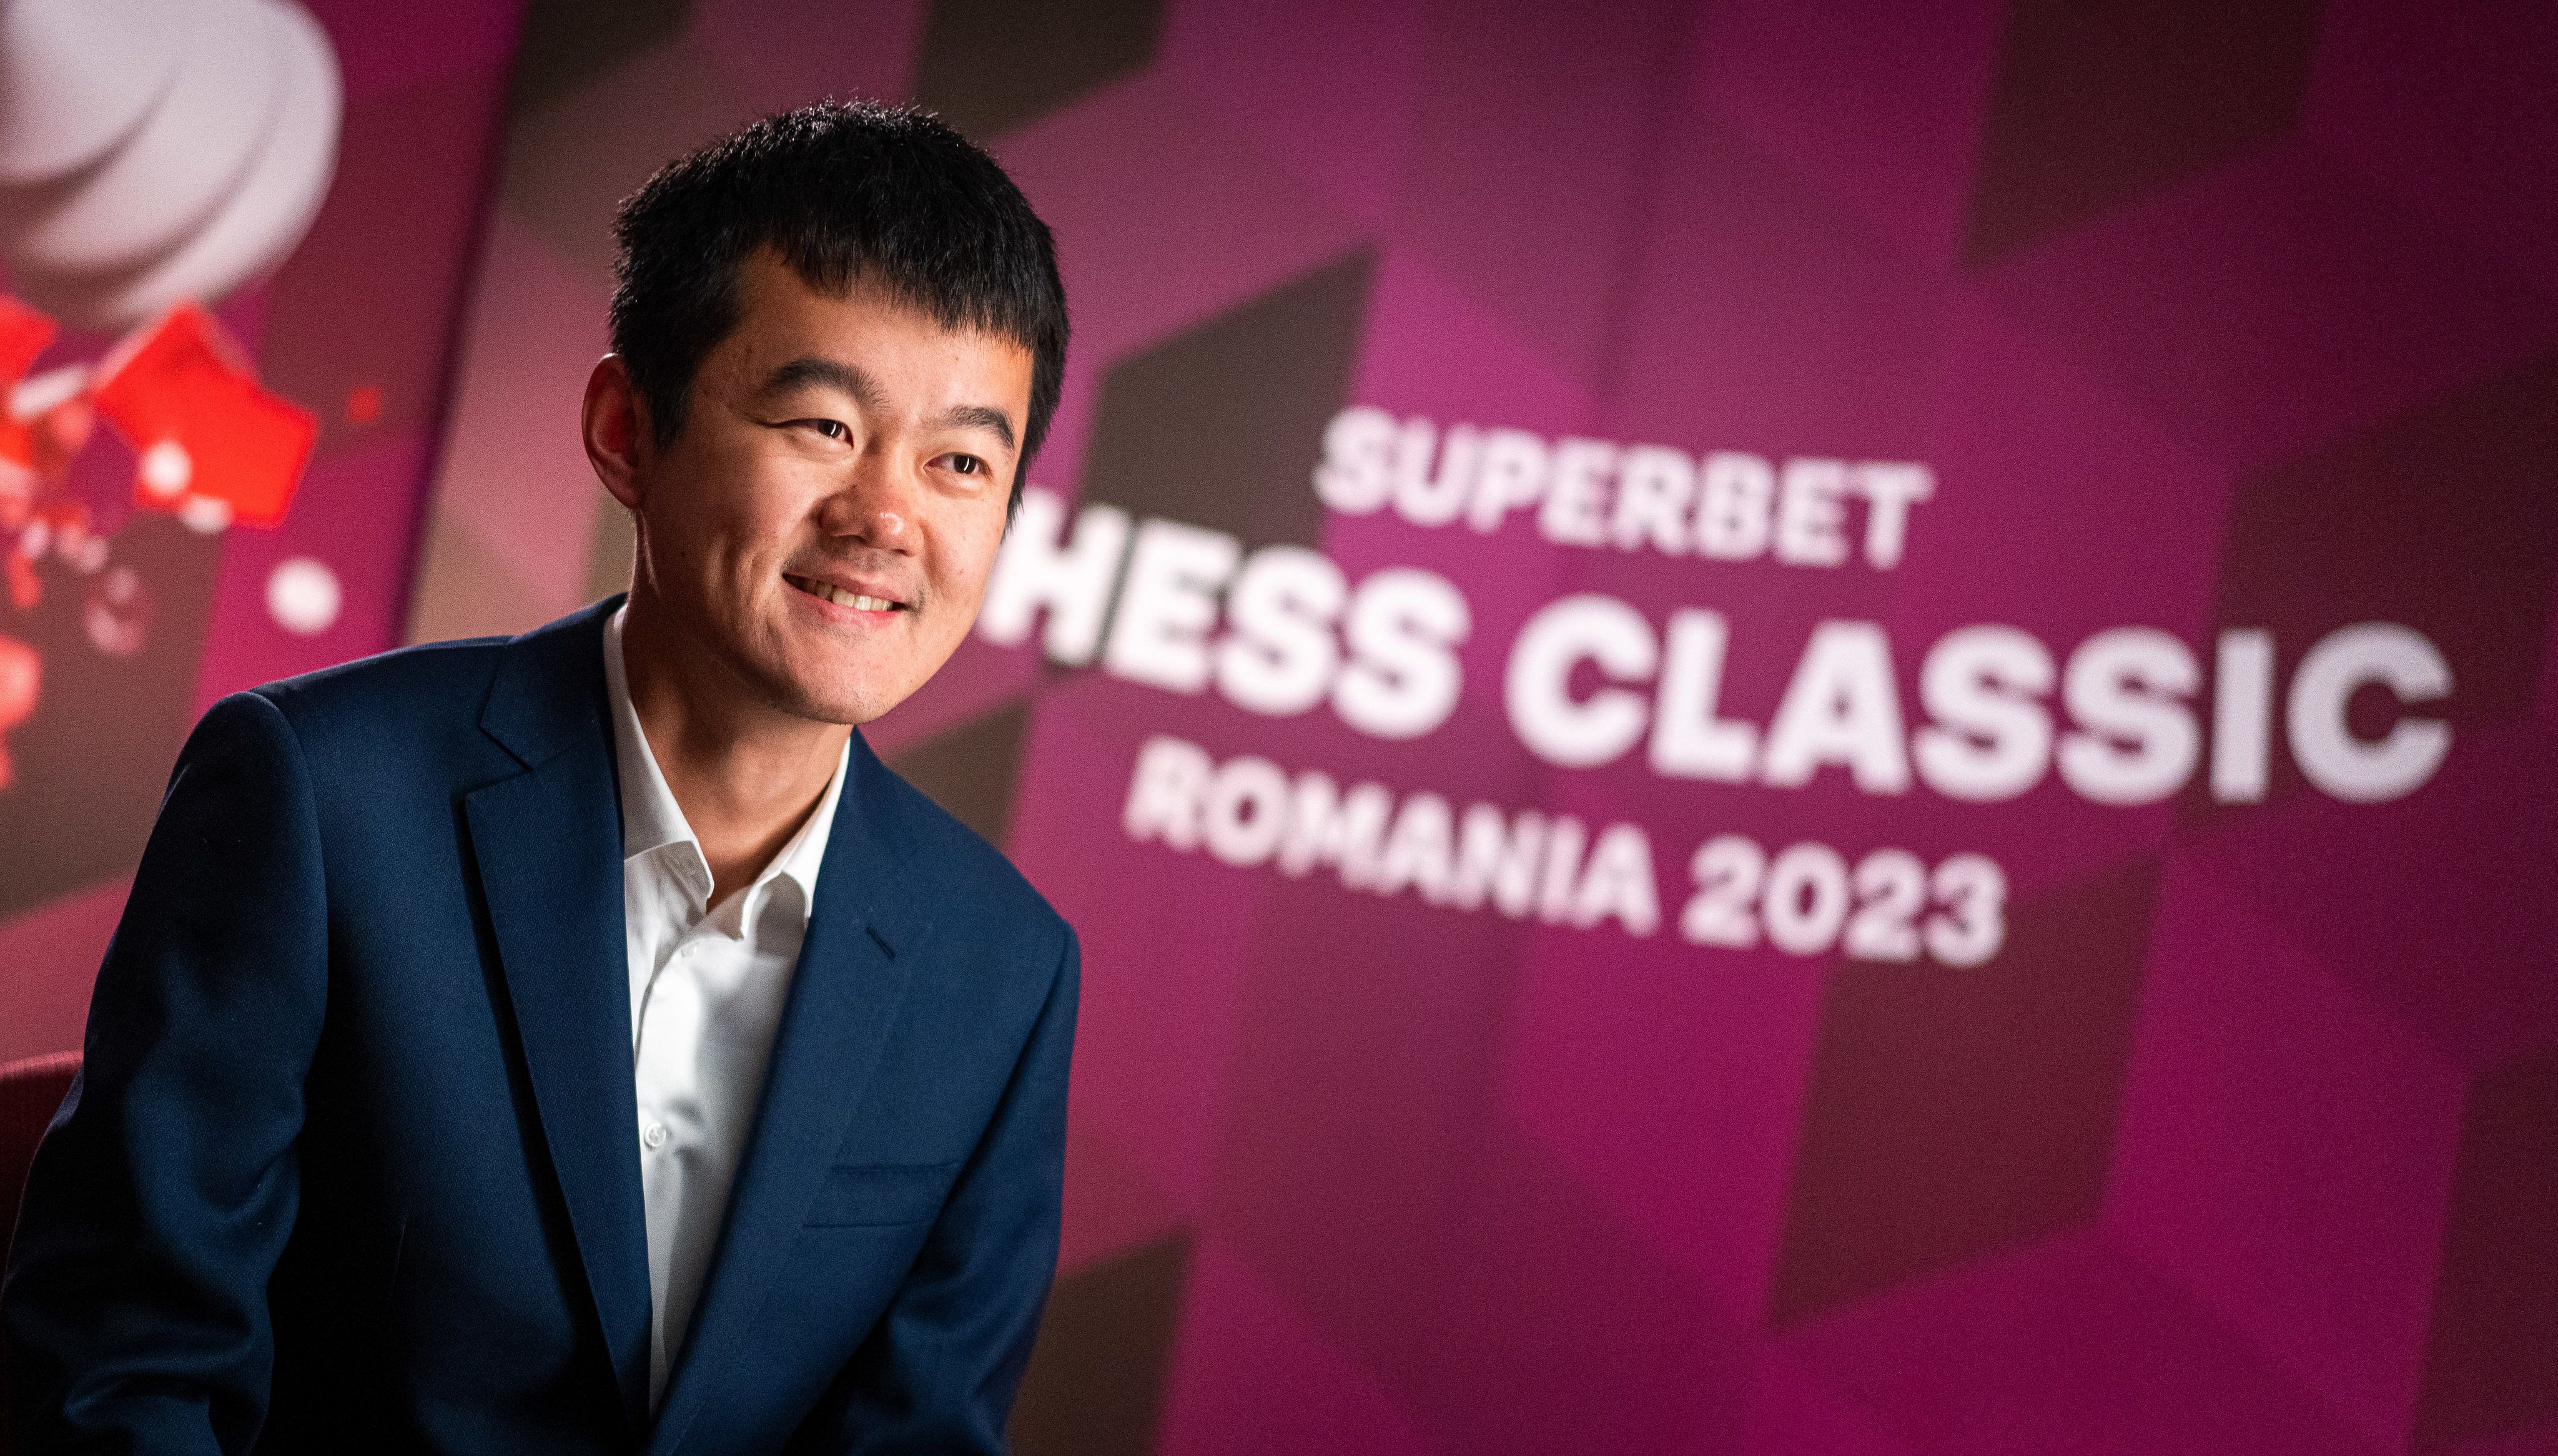 Ding, Nepo and Rapport to face off in Romania